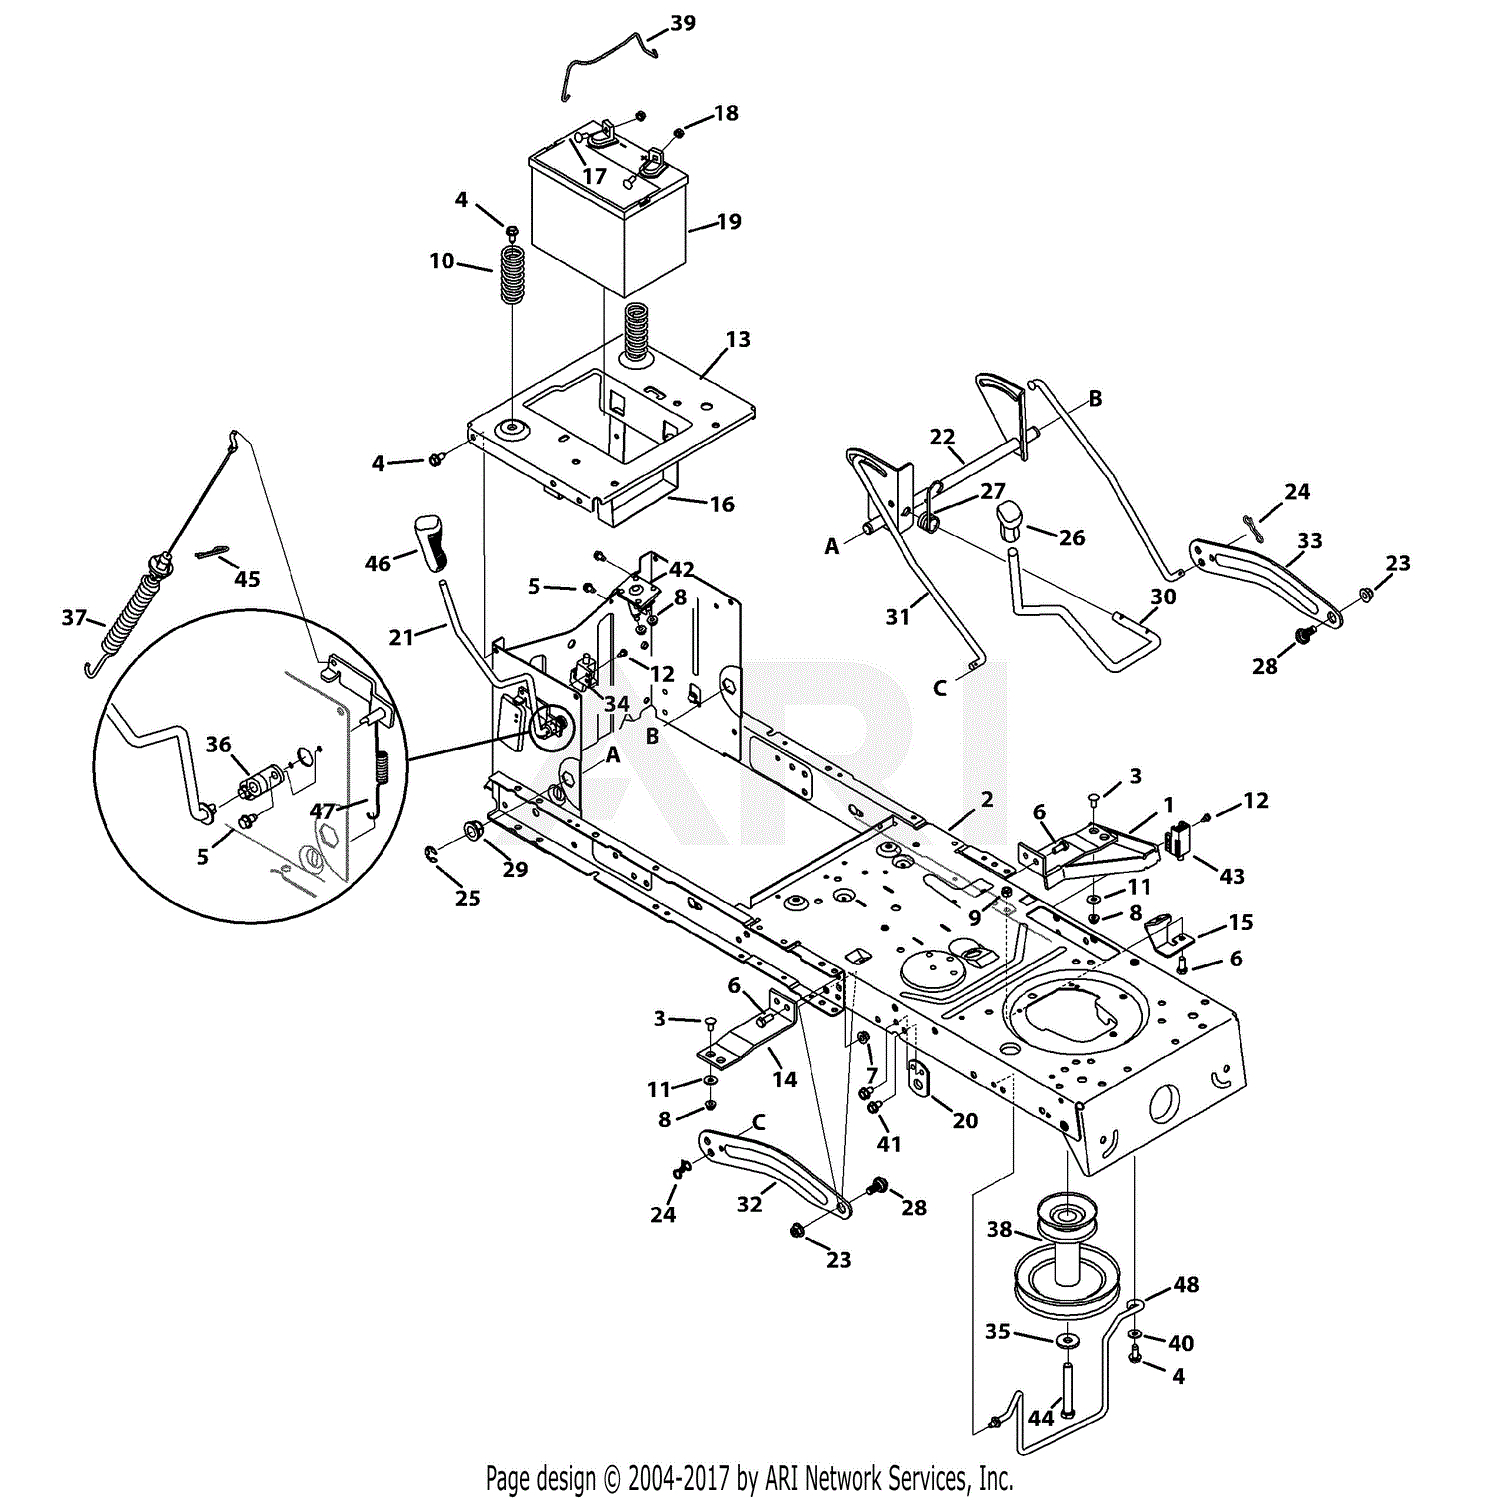 Huskee Lawn Mower Parts Diagram Lt3800 13a276lf031 Huskee Lawn Tractor 2013 Label Map Diagram